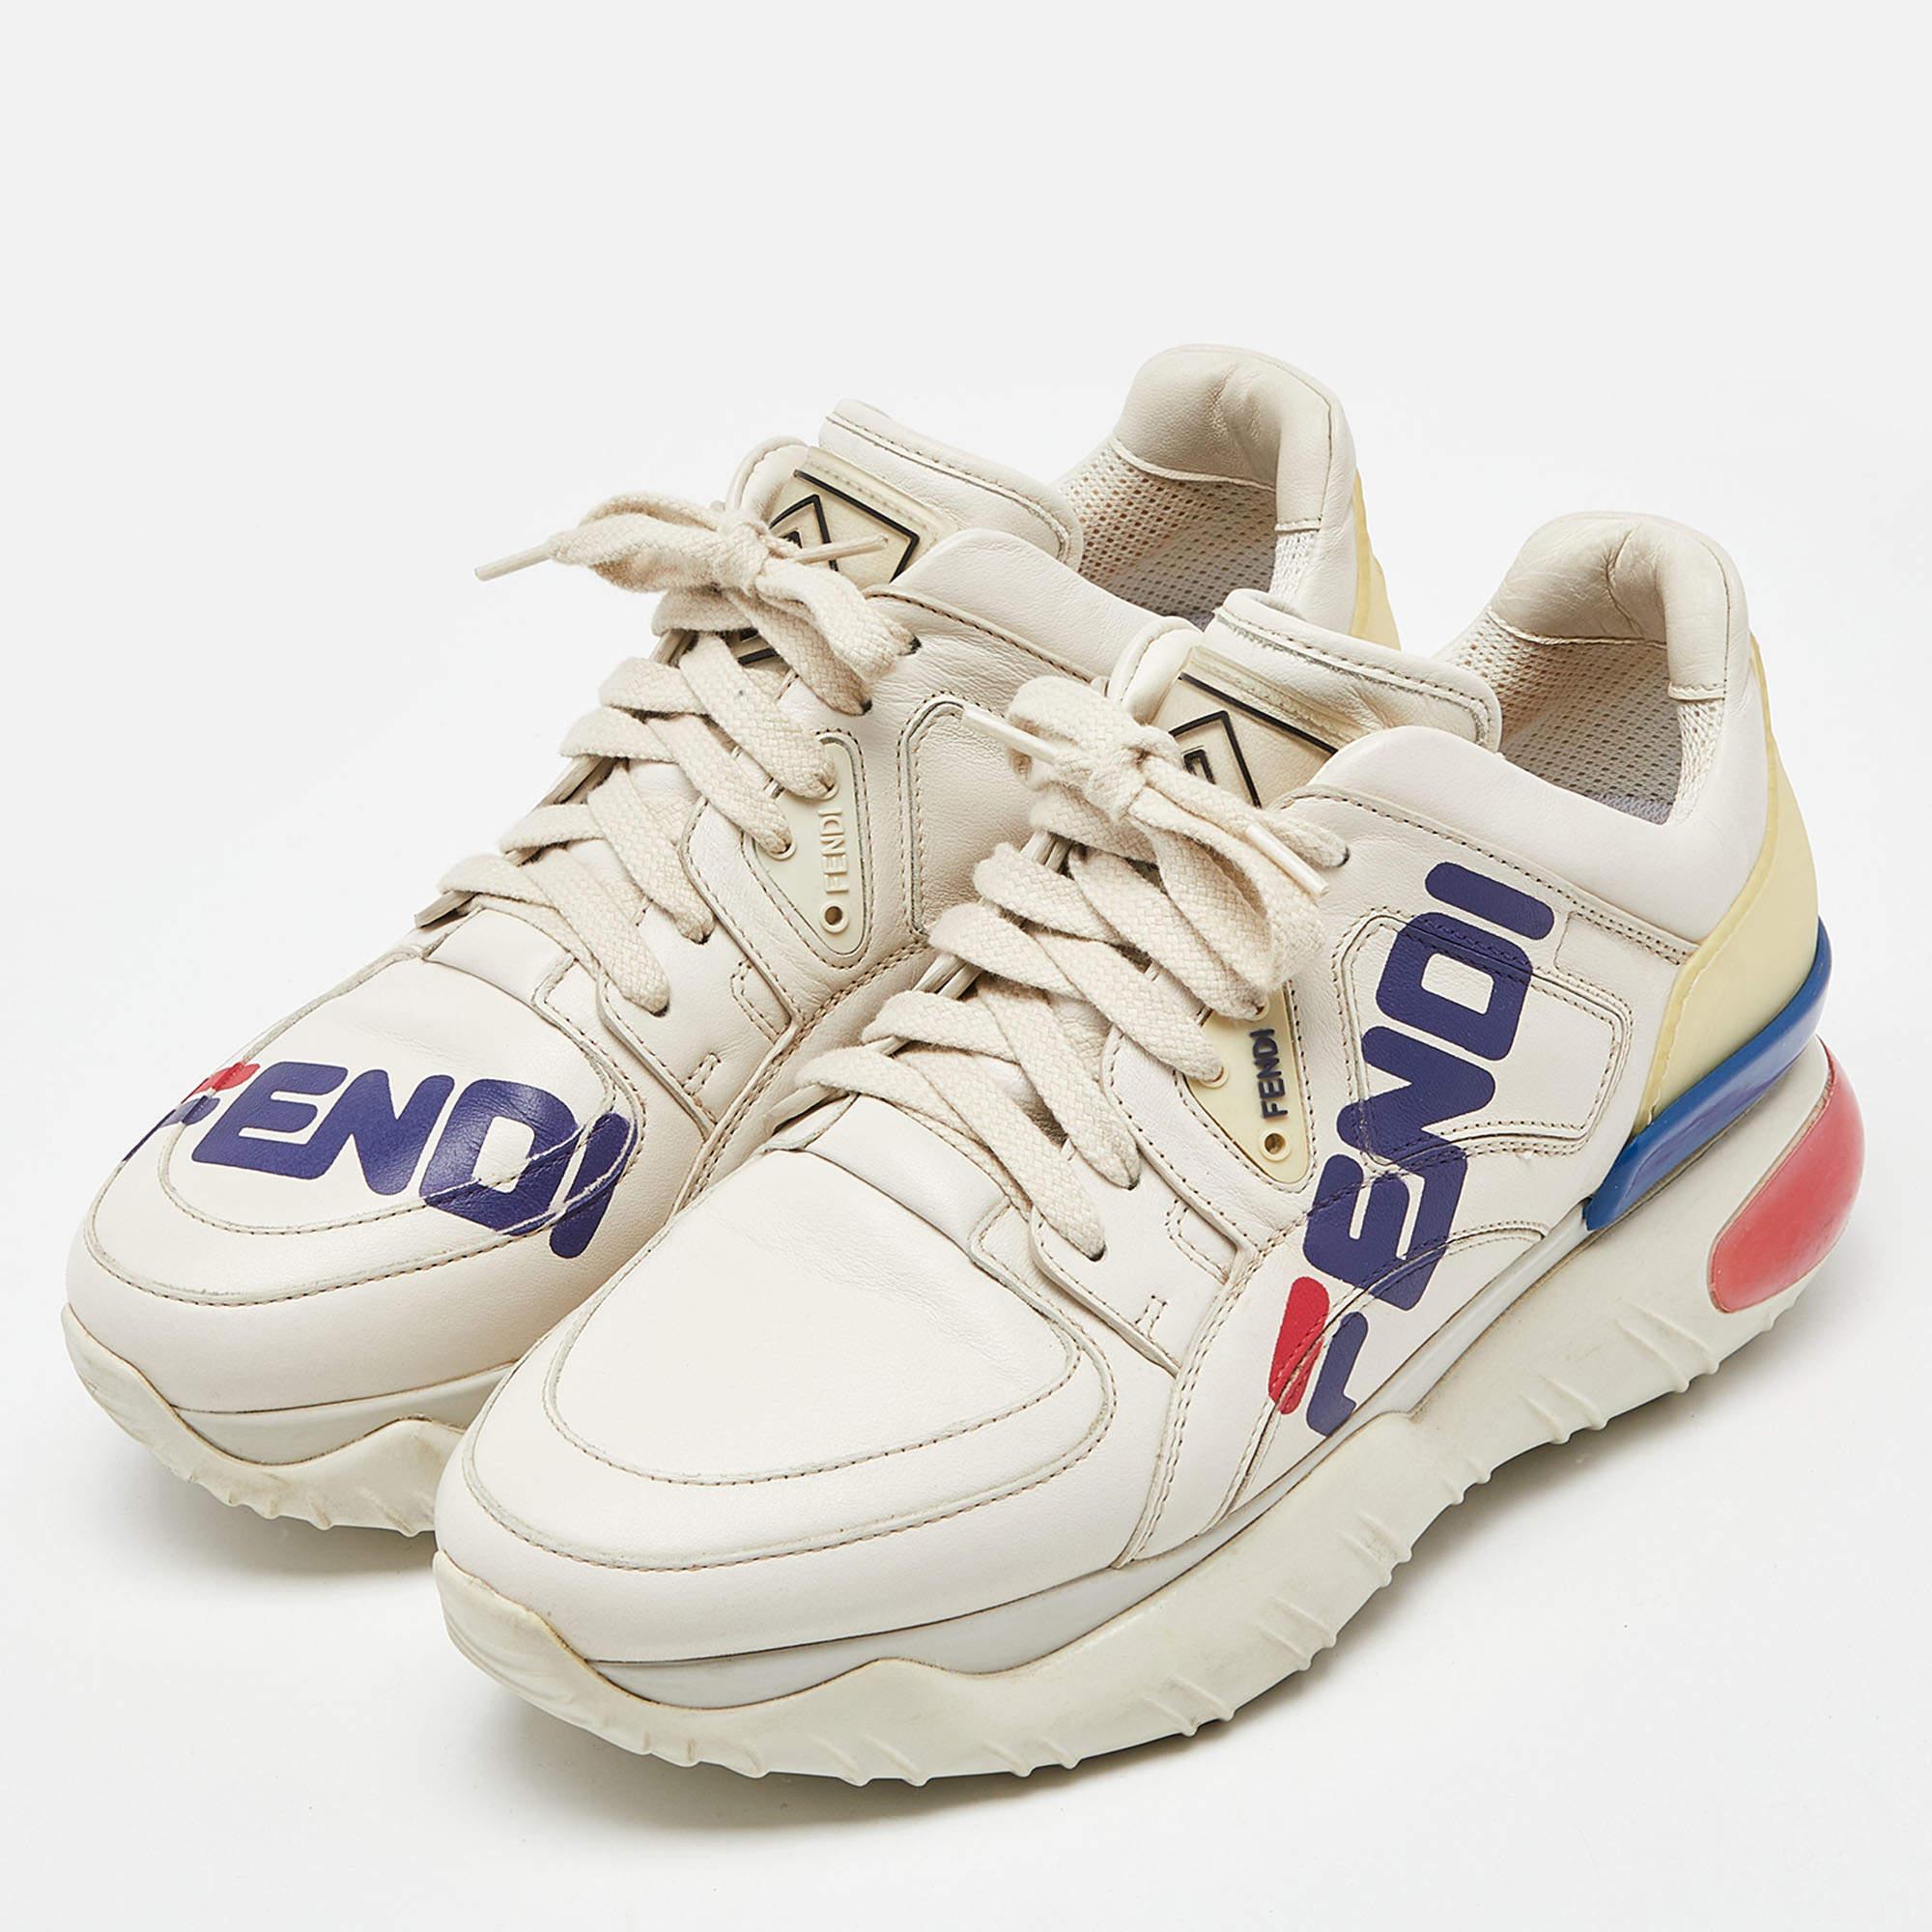 These sneakers are from the collaboration between Fendi and Fila. Made from leather and rubber, they feature durable soles and lace-up vamps. Fila's signature red and blue as well as other elements are seamlessly incorporated into the Fendi pair.

